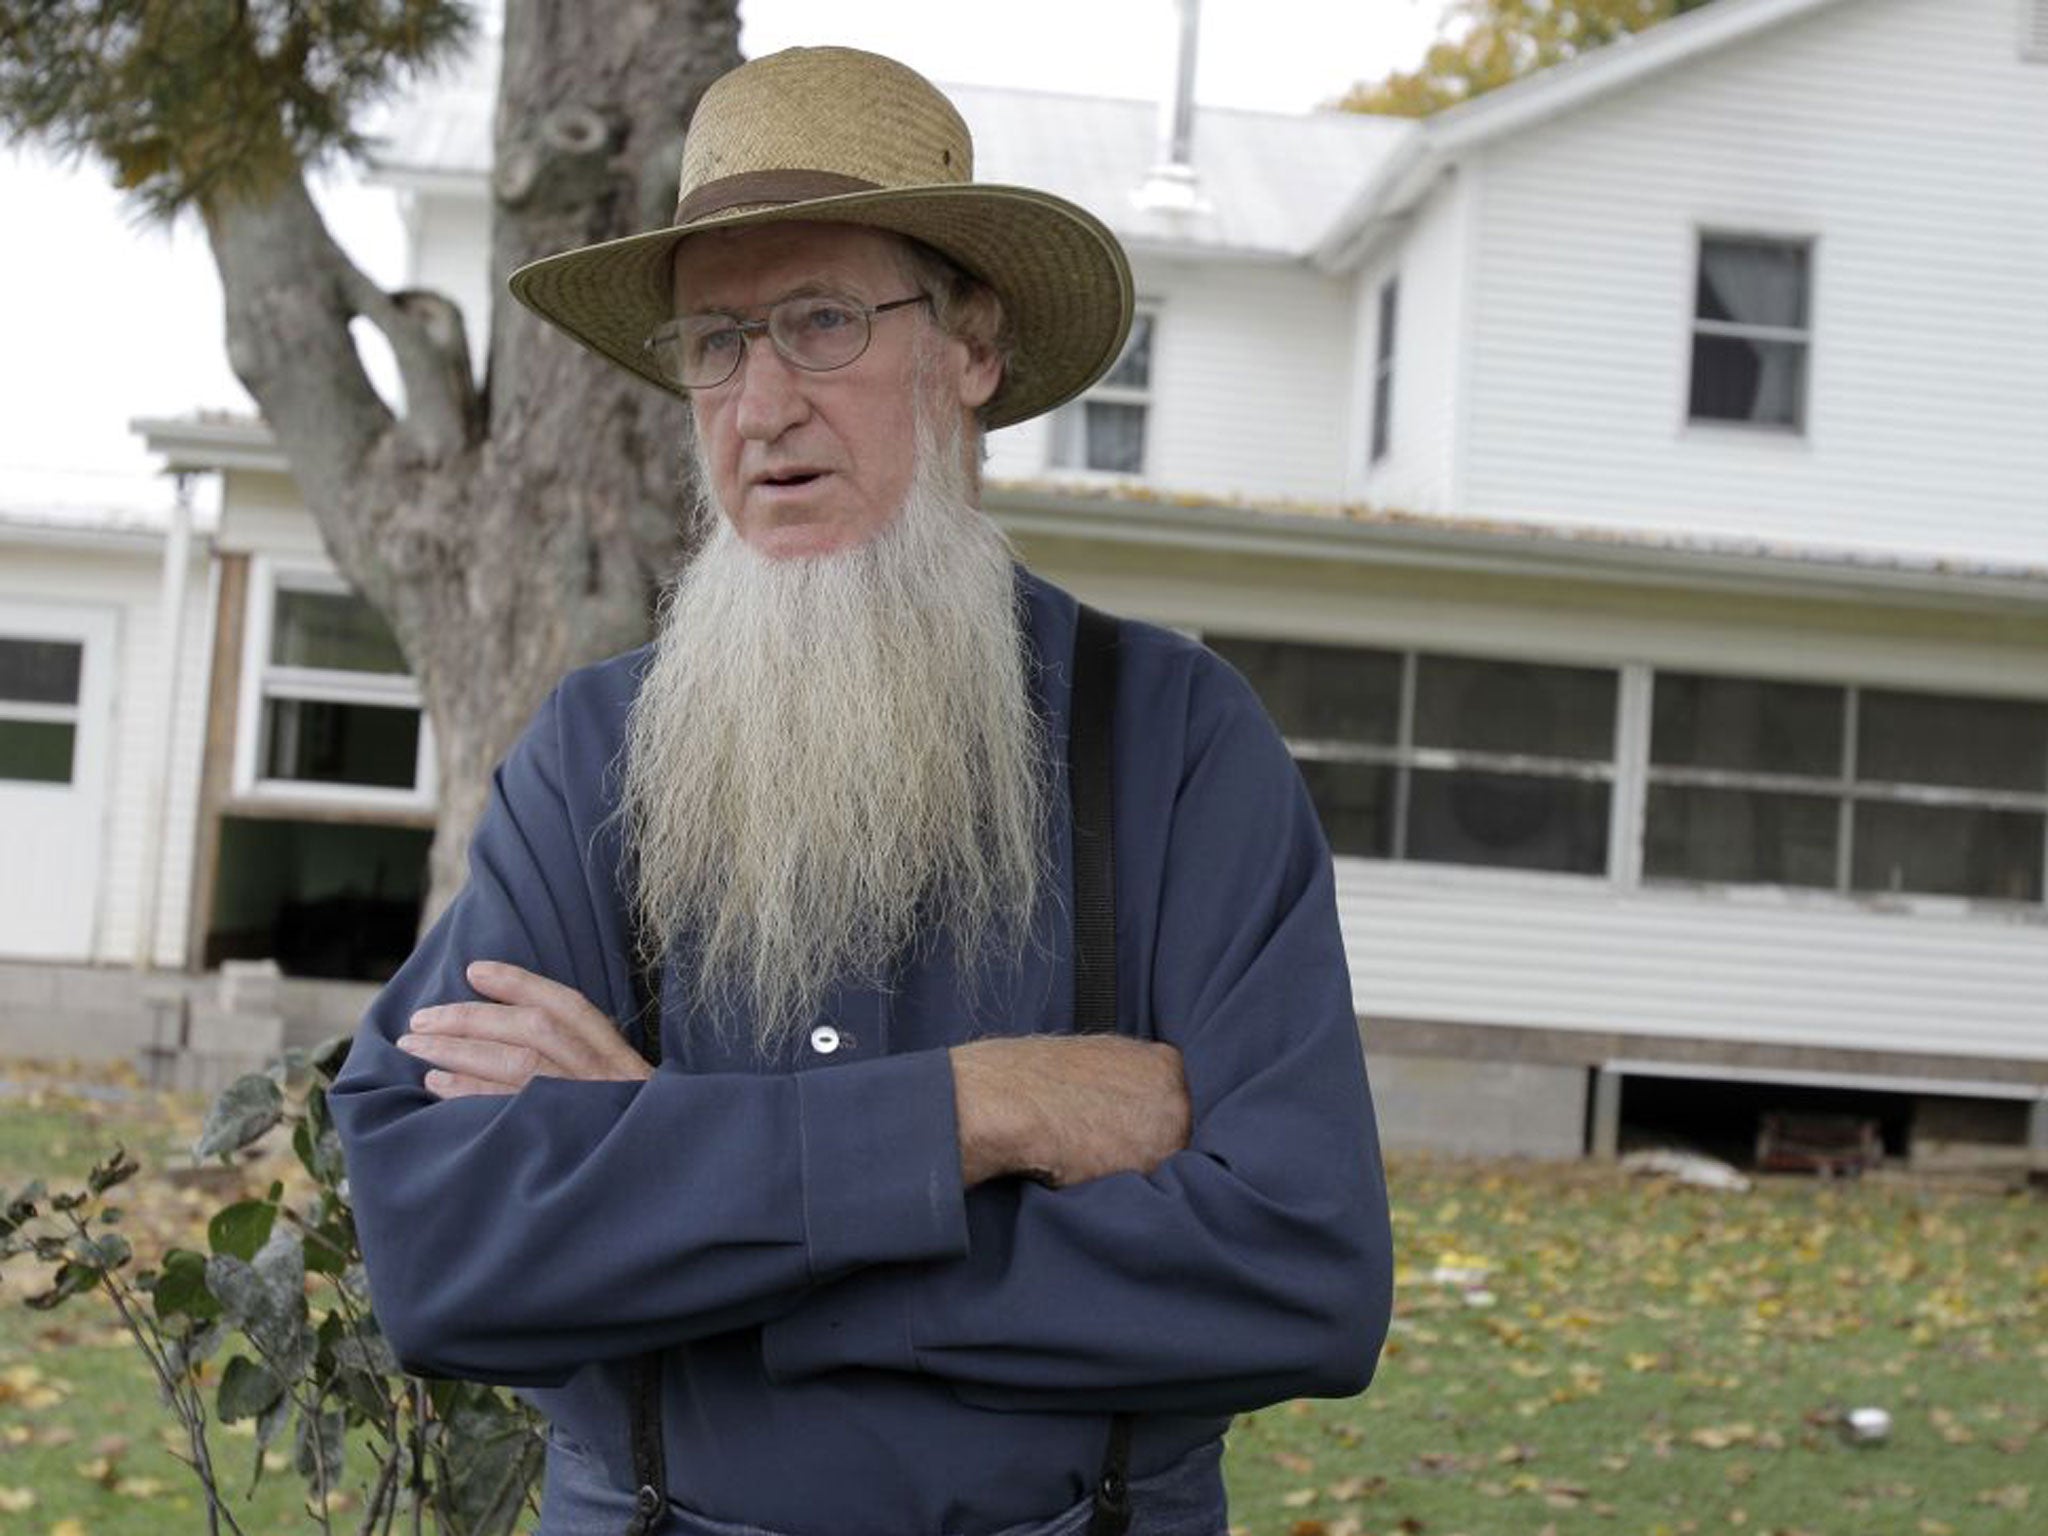 Amish leader Samuel Mullet at his Ohio home